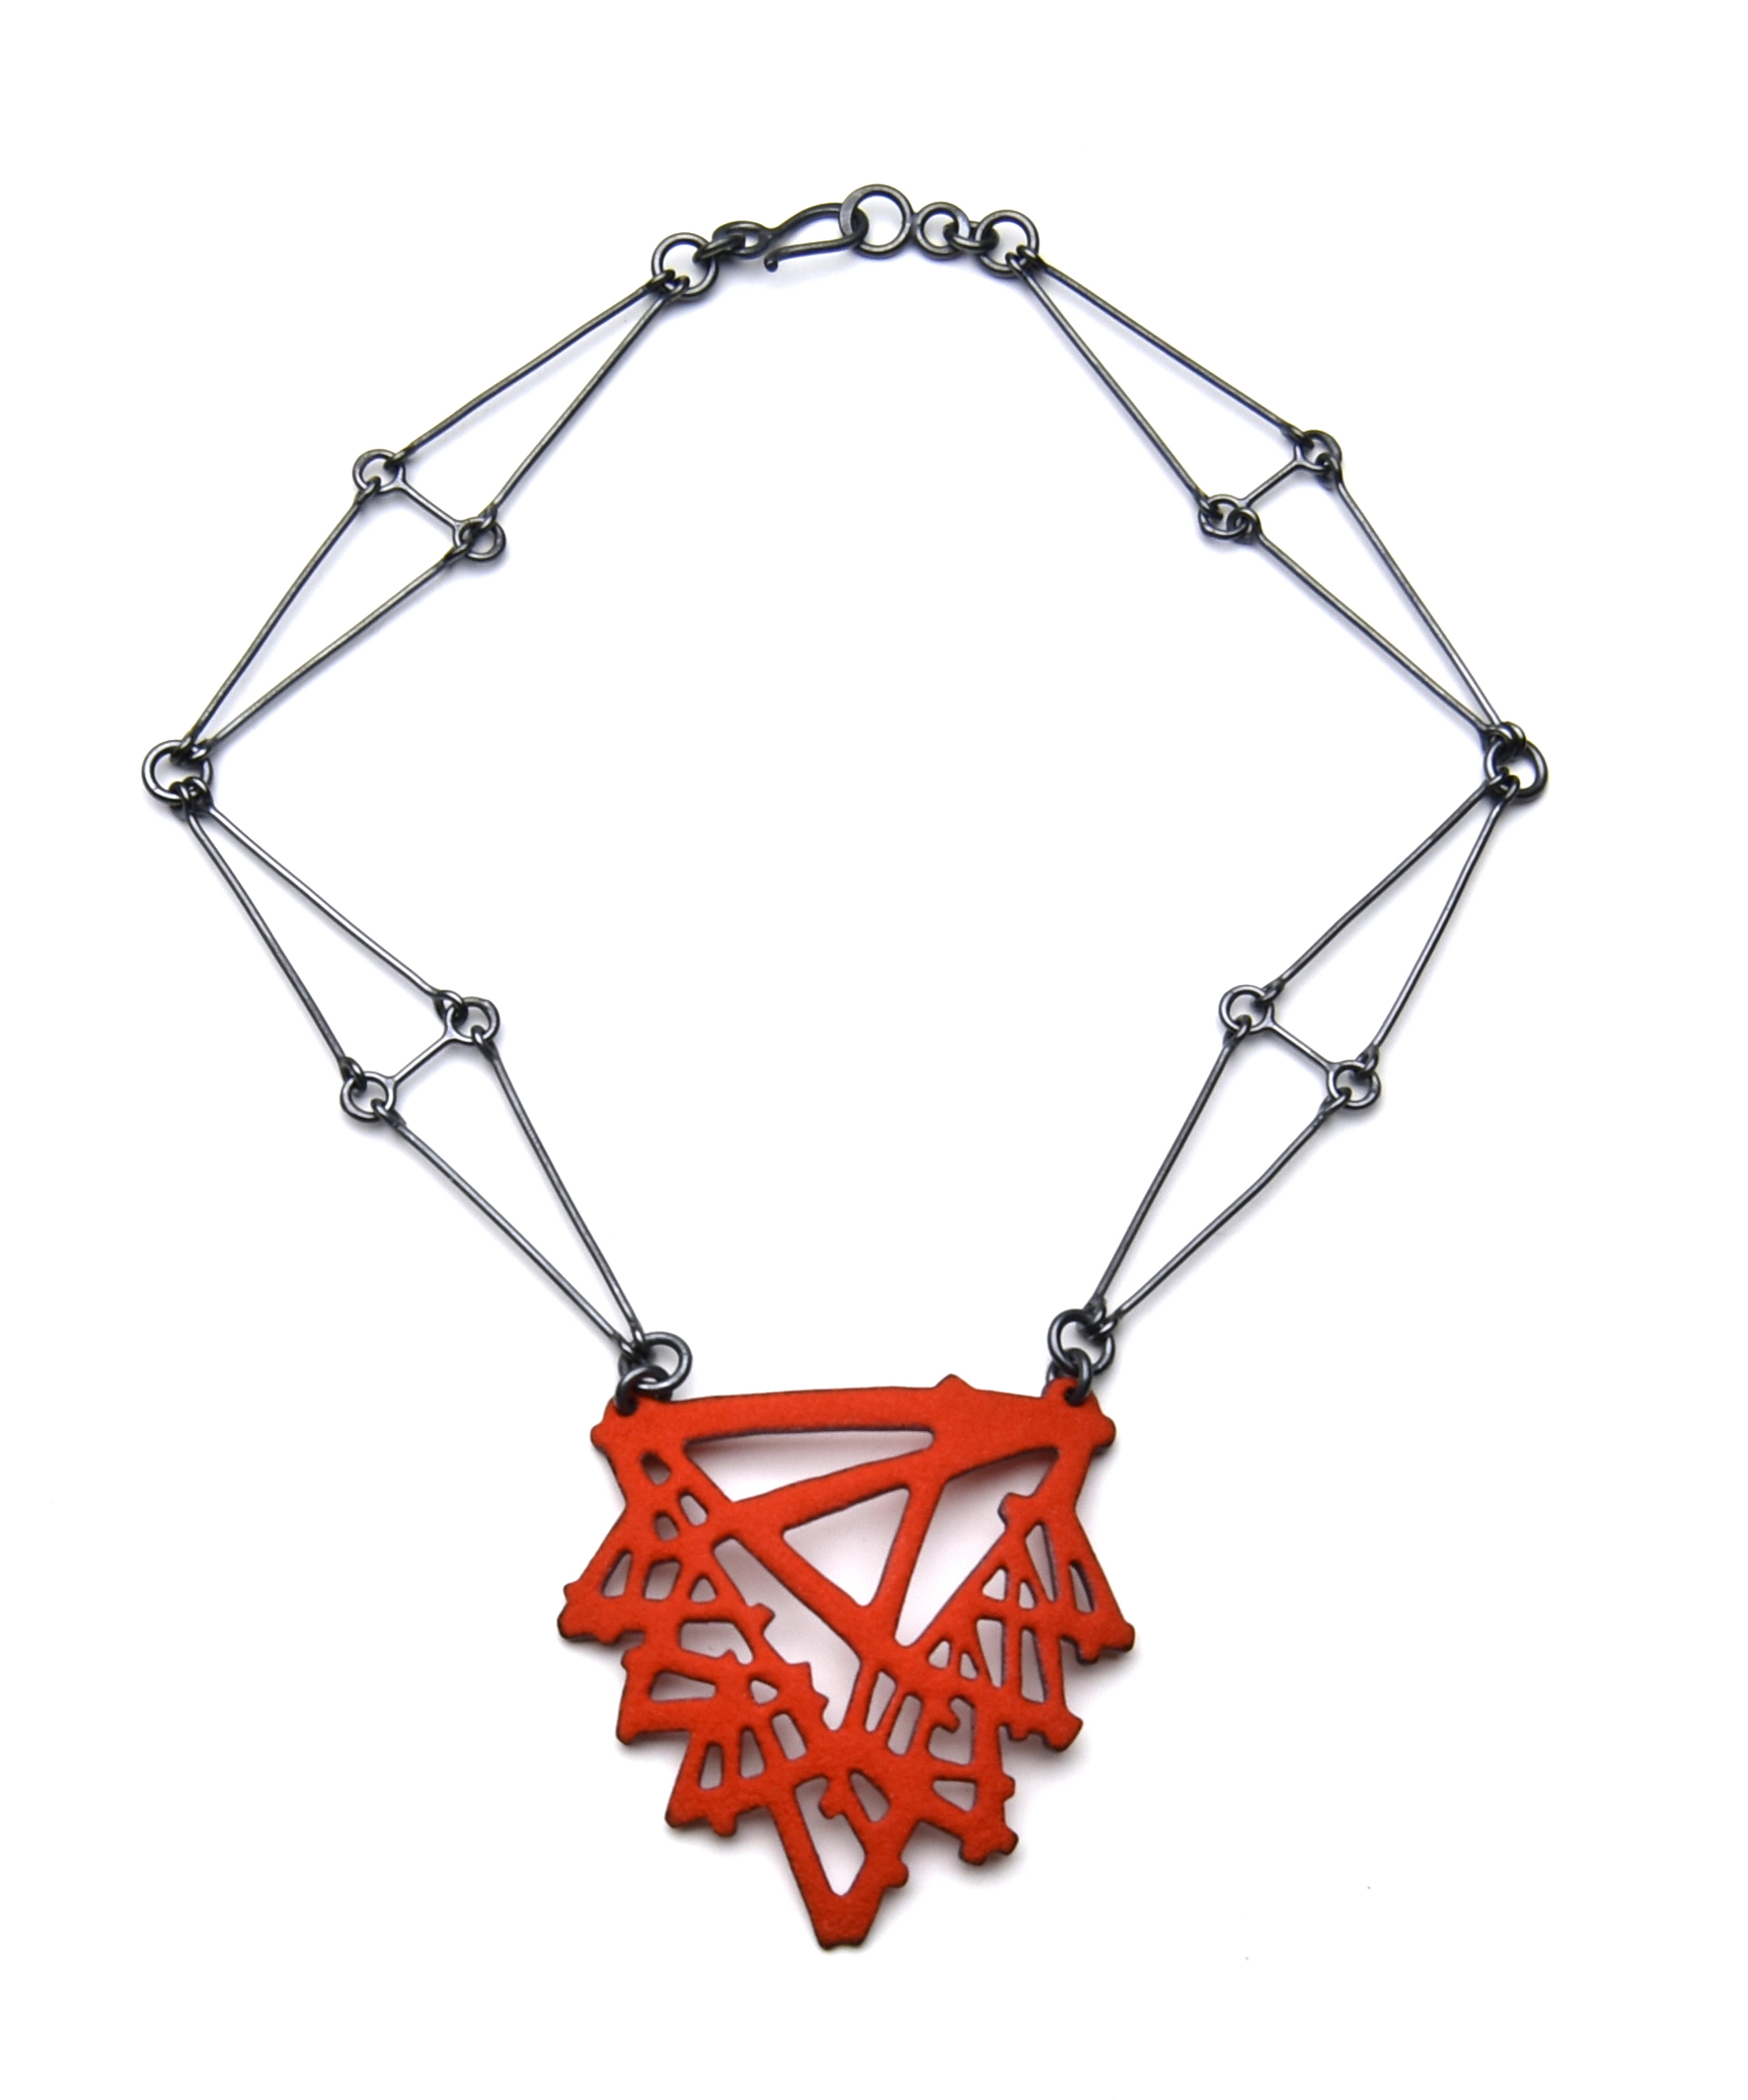 Triangle Necklace with Triangle Chain by Joanna Nealey